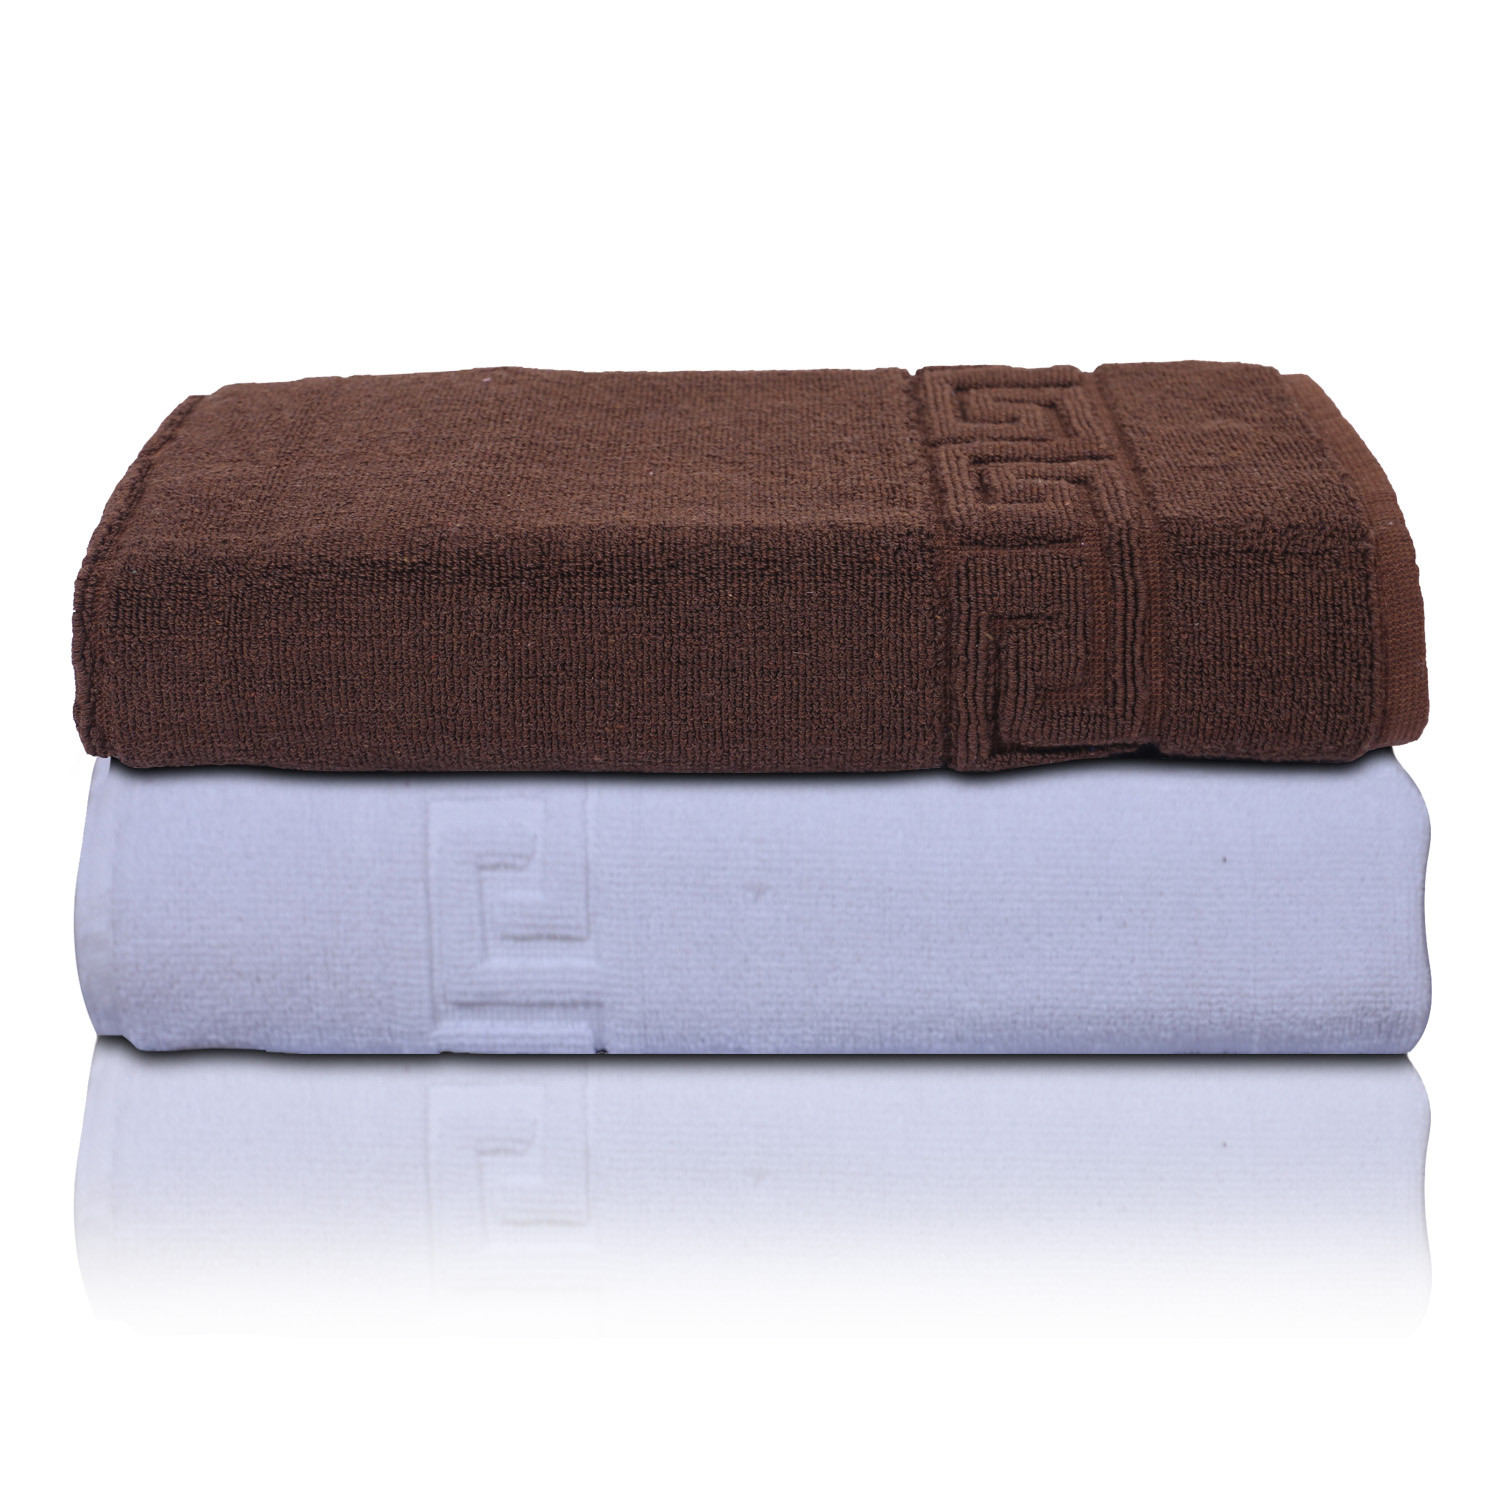 Kuber Industries Greek Design Super Absorbent Cotton 400 GSM Hand Towel|Face Towel|Bath Nets for Men,Women,Kids,30x20 Inches,(Brown & White)